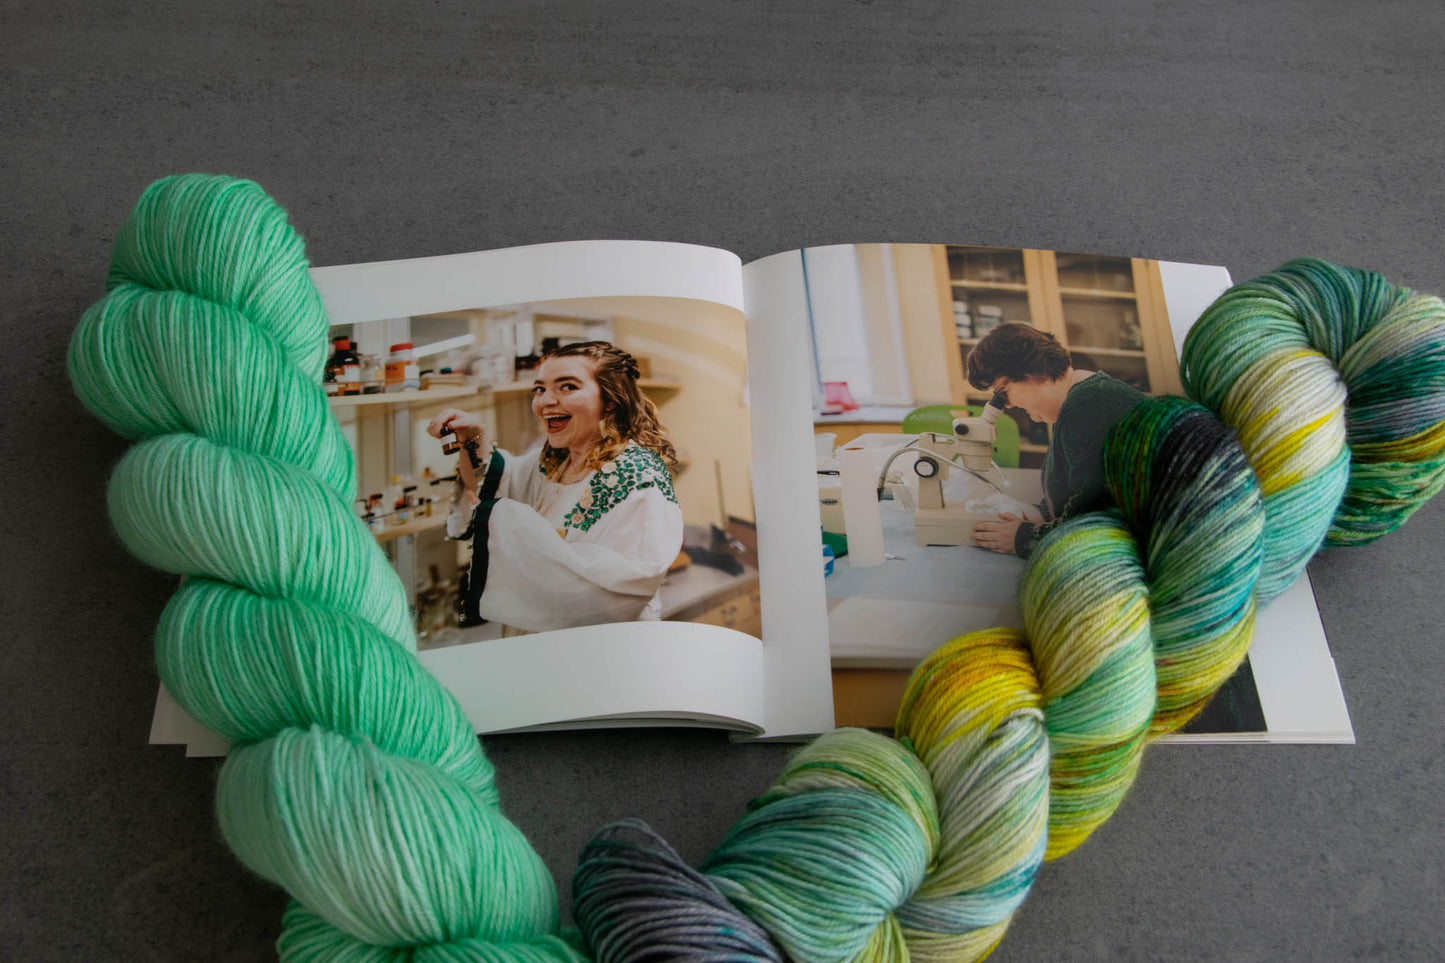 A skein of aqua Dana with its complementary aqua, yellow, green, and gray variegated colorway and graduation photos of Cat and Penny.